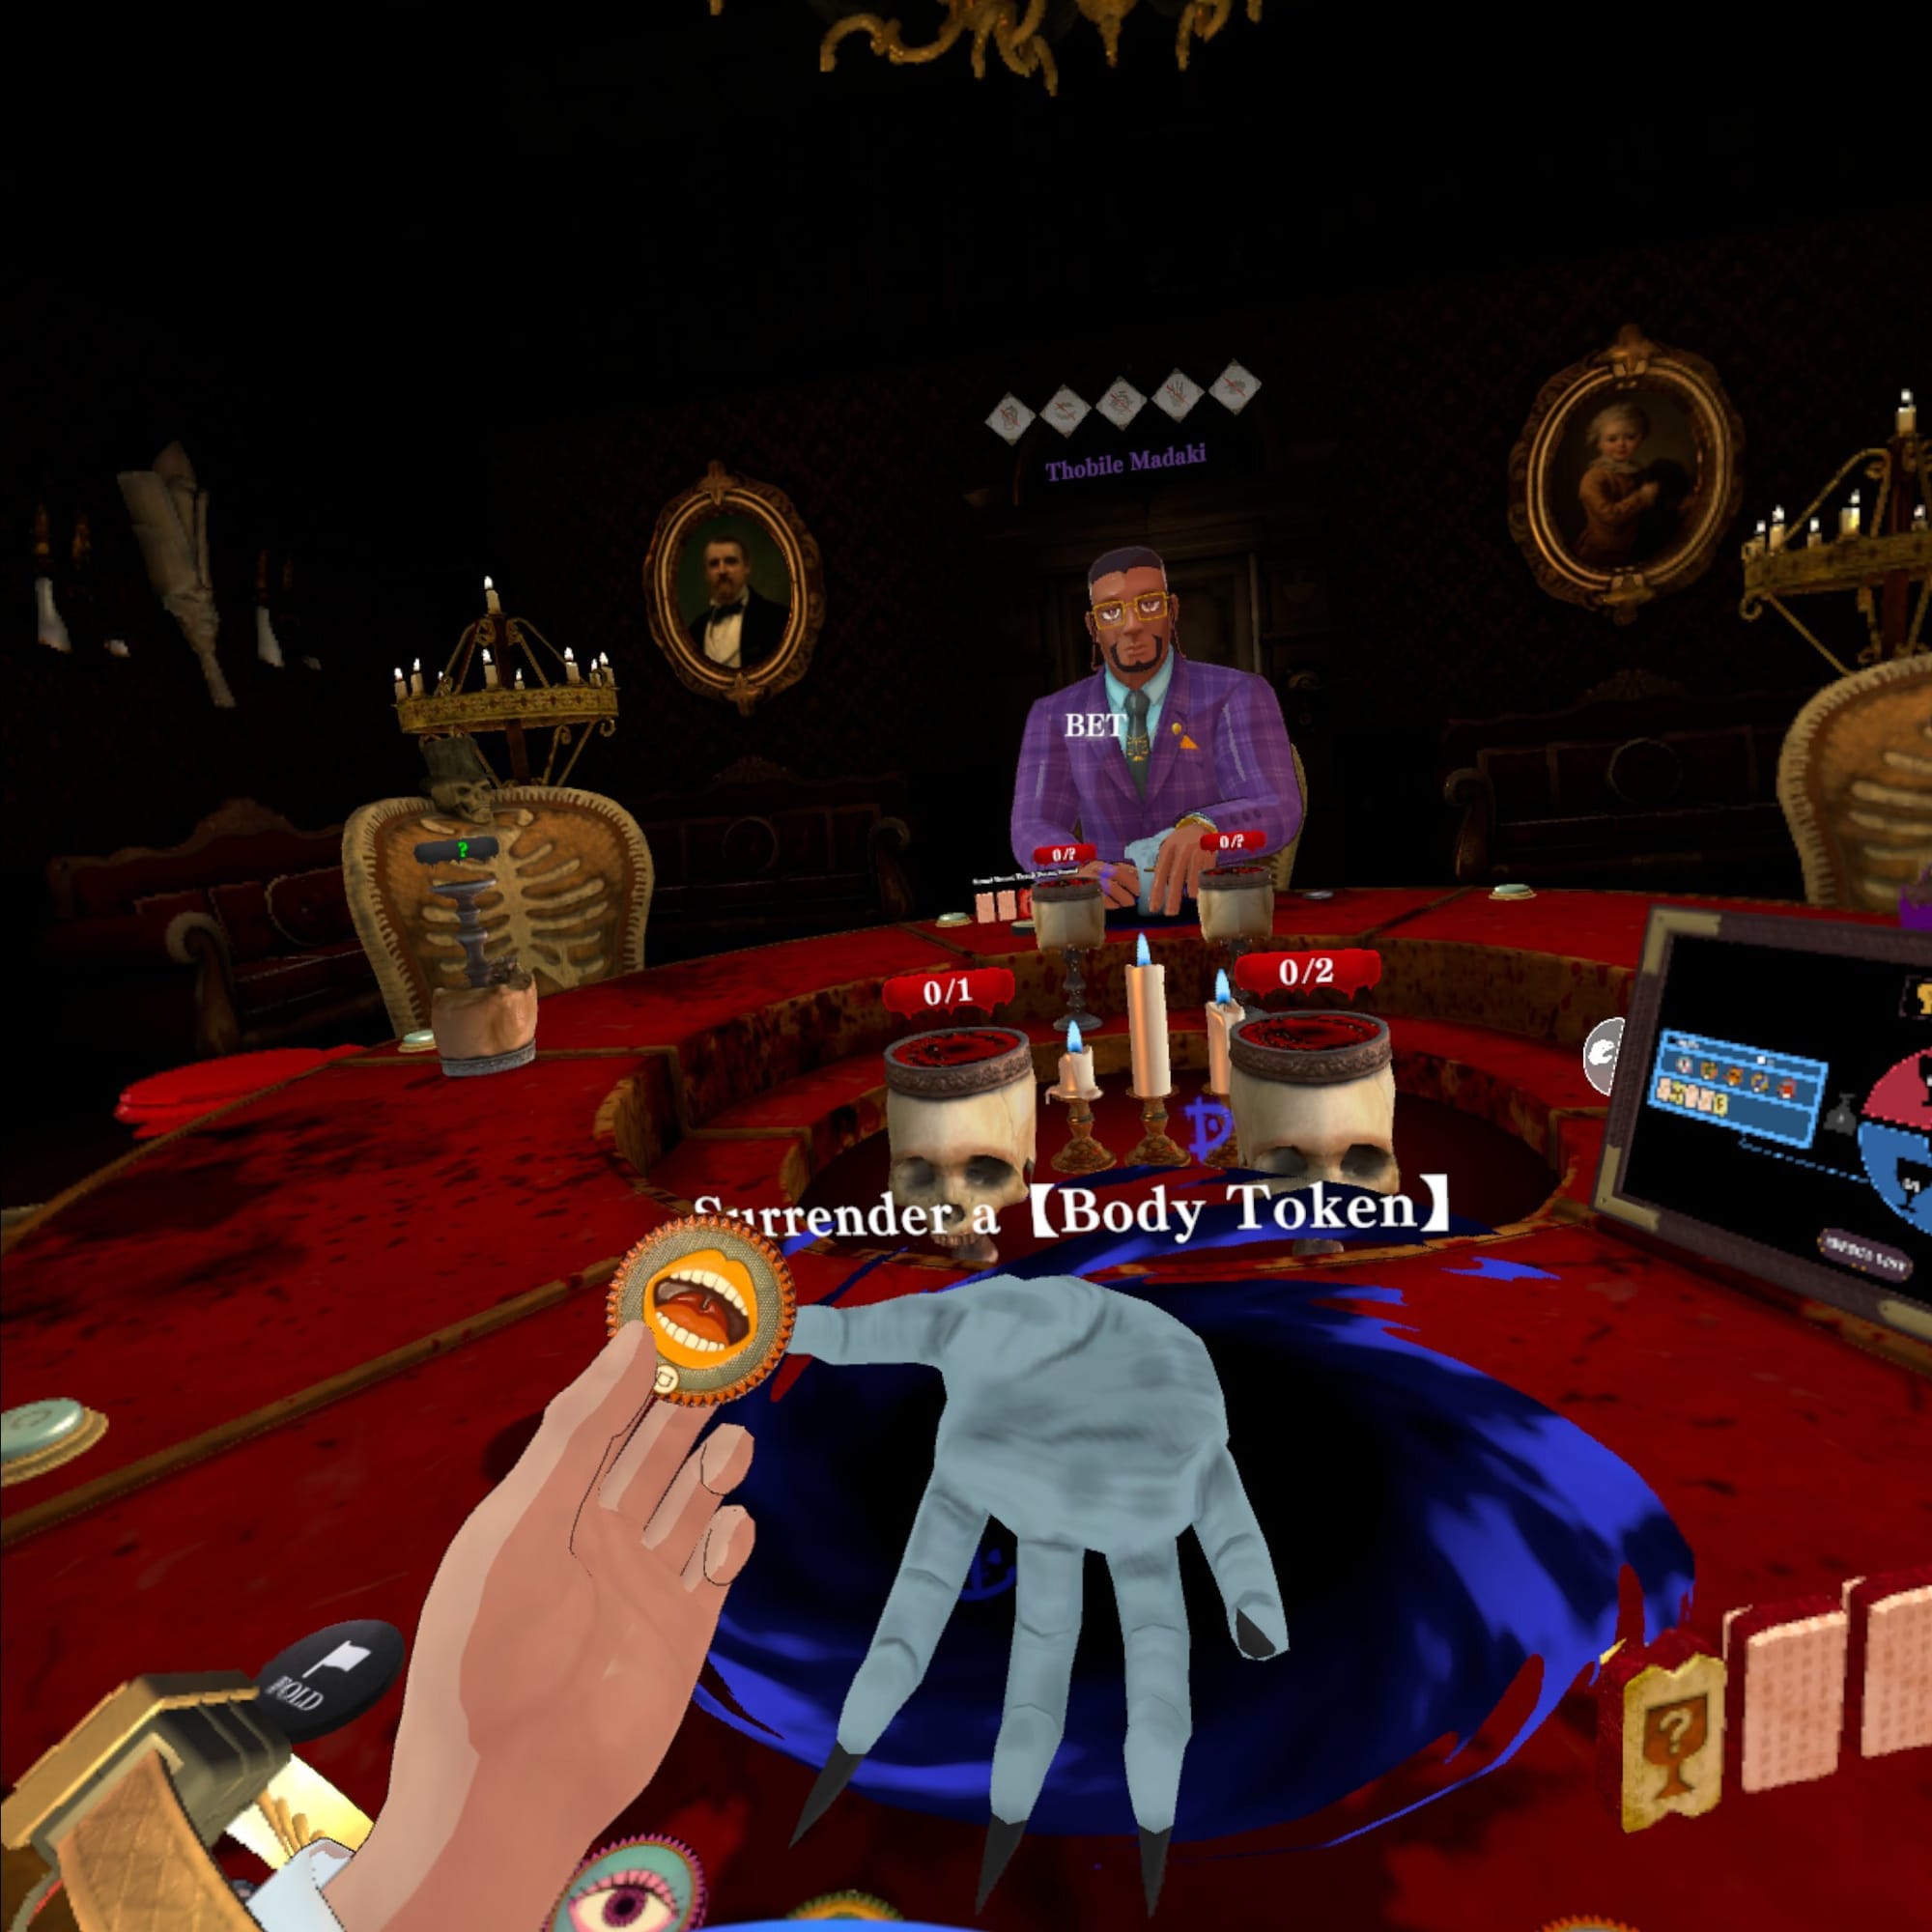 Surrendering a body token to the hand coming out of the table